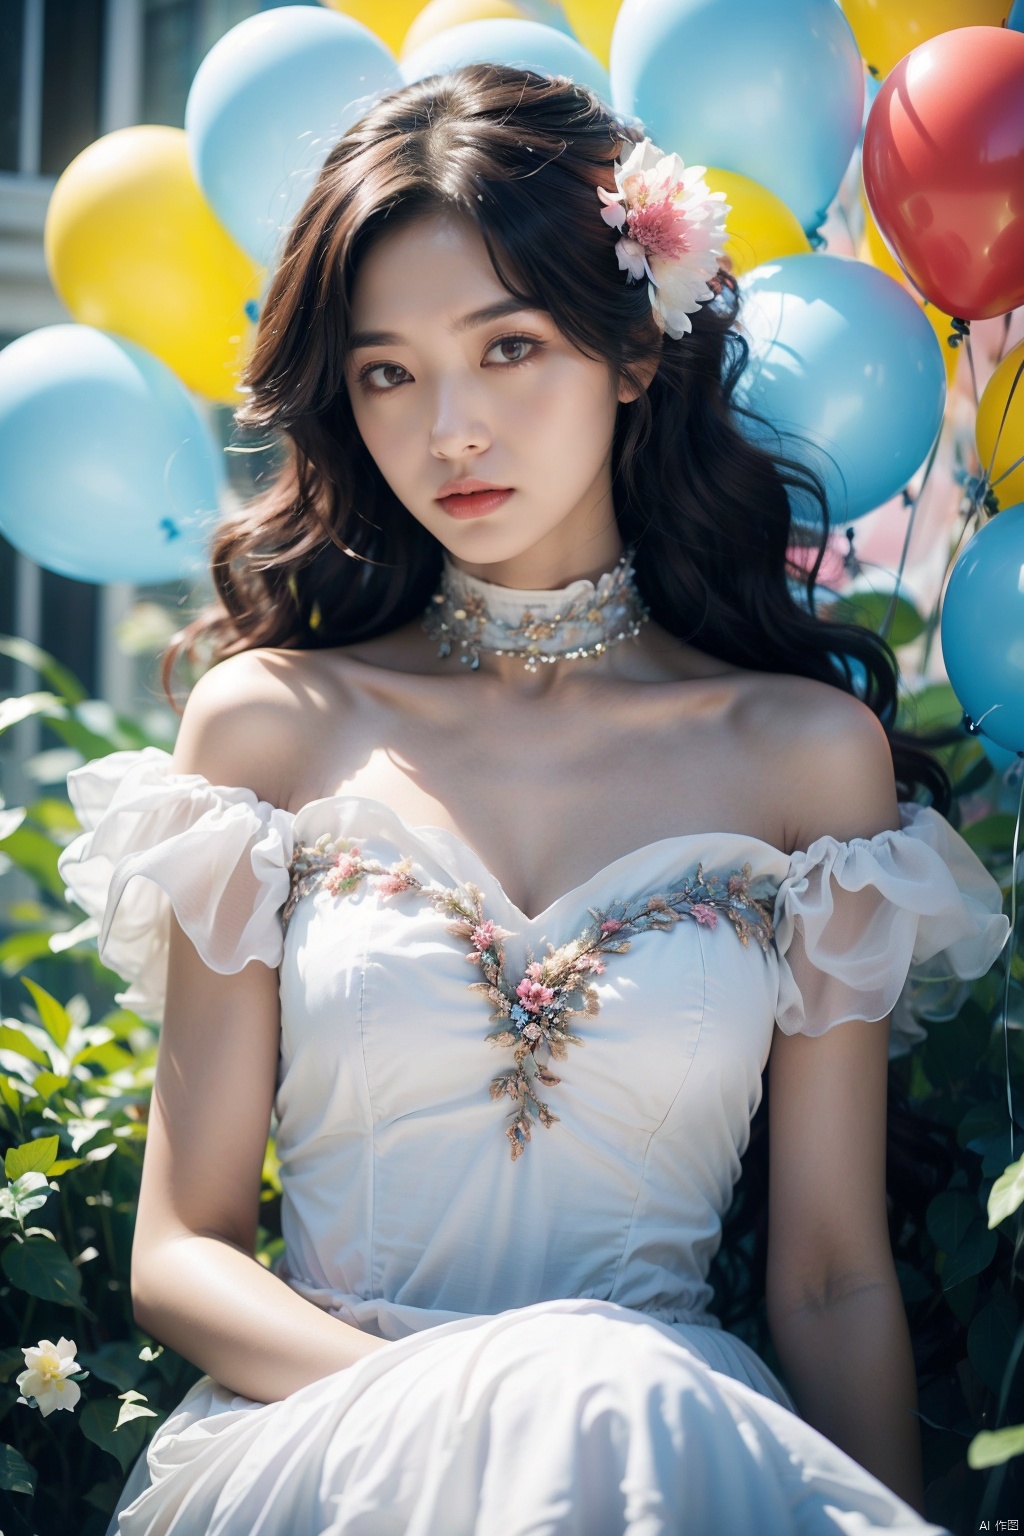 1 girl, with fluffy rainbow colored long hair, messy hair, exquisite facial features, perfect facial features, exquisite skin, wearing a white dress, slender waist, ethereal, retro photography, sitting in balloons and flower bushes, created by Kawaguchi Linzi Art, in a natural posture, holiday style, youthful vitality, calm expression, flowers in the sky, simulation movies, super details, dreamy LOFI photography, colorful, covering balloons, Flowers and vines. From below, shot on film XT4, realistic, 16k, super detailed

